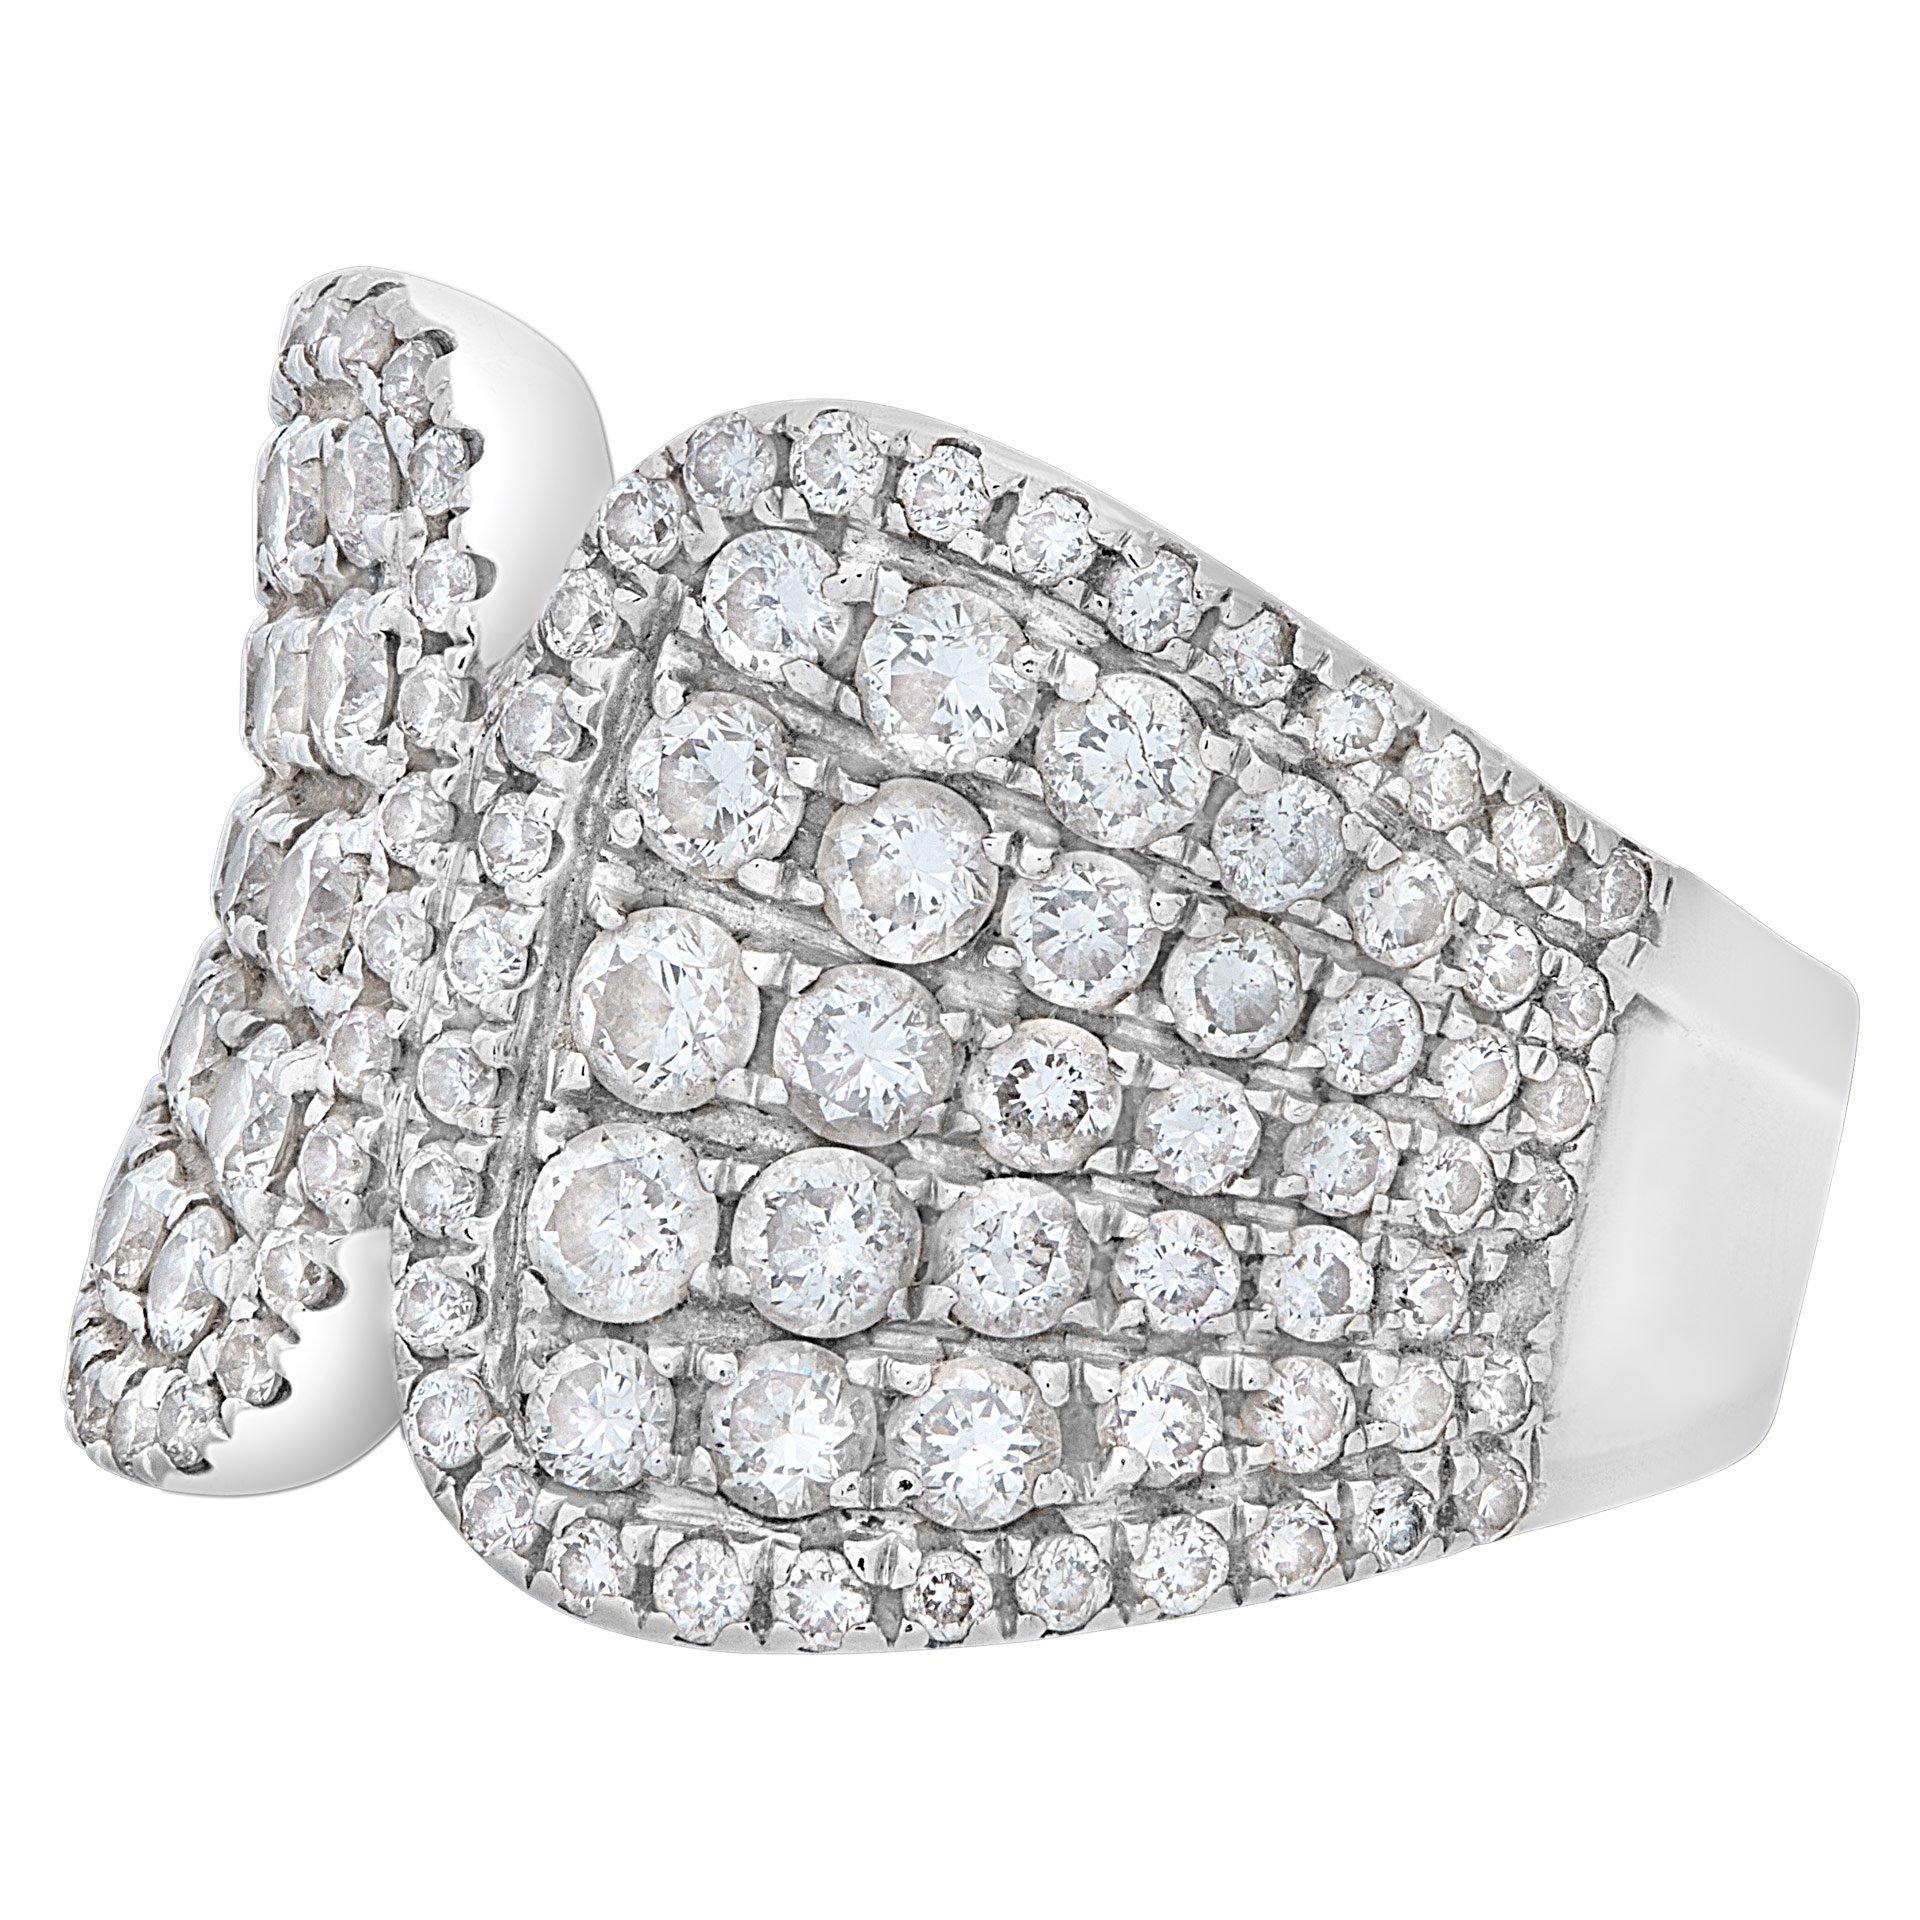 Women's Diamond Ring in 14k White Gold with over 1.50 Carats in Round Brilliant Cut G-H For Sale